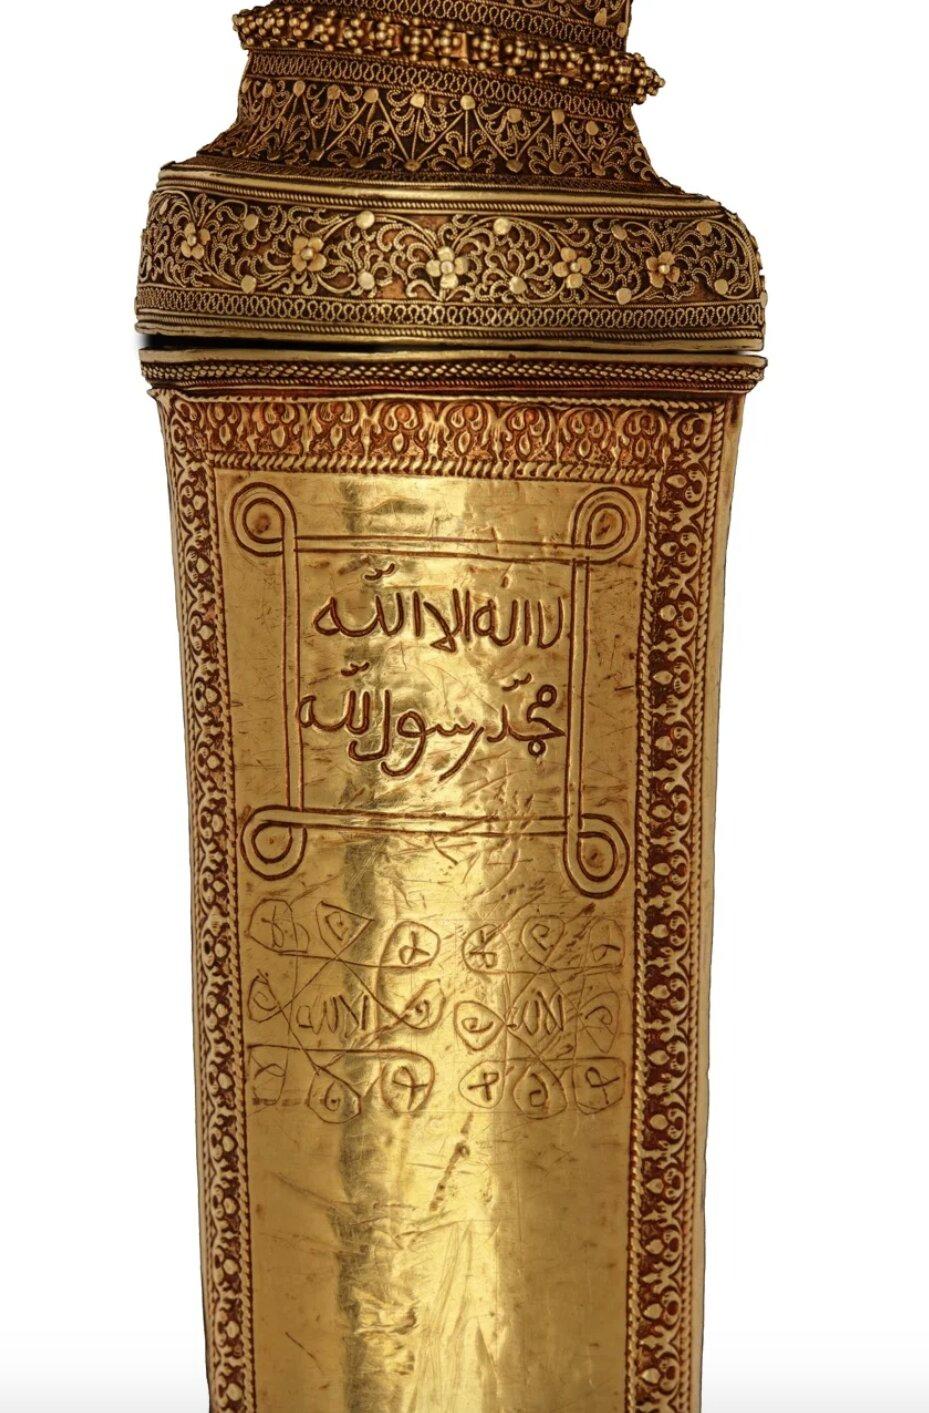 A Royal Indonesian Buginese gold and buffalo horn badek dagger

Indonesia, Sulawesi, 1st half 18th century

L. 54 cm
?
The solid gold scabbard is inscribed with a magic square, as well as inscribed in Arabic: La ilaha illallah Mohammed ur